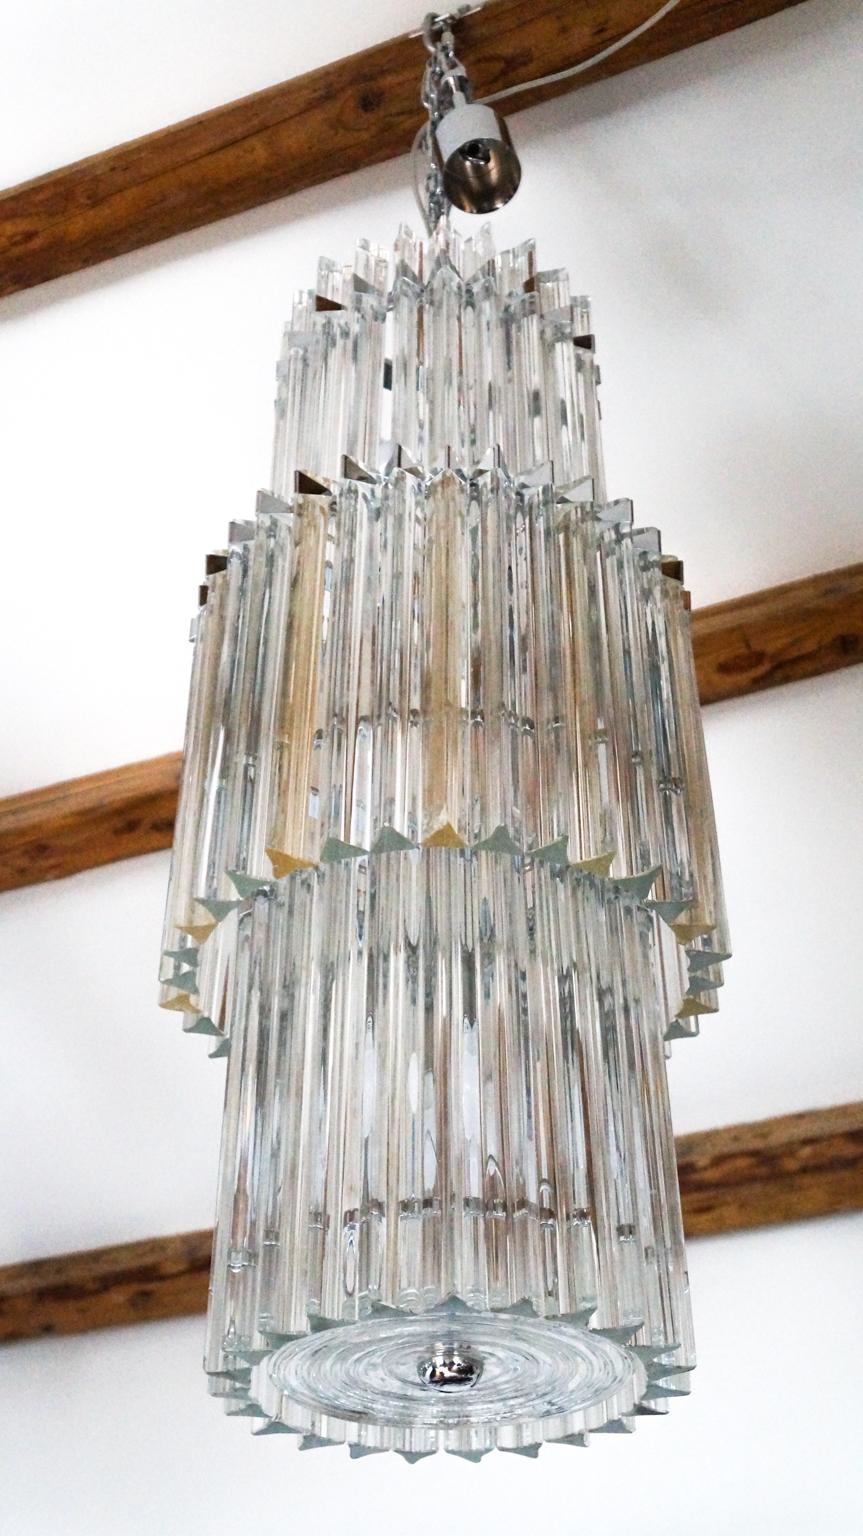 Hand-Crafted Alberto Donà Mid-Century Modern Crystal Murano Glass Triedri Chandelier, 1990s For Sale